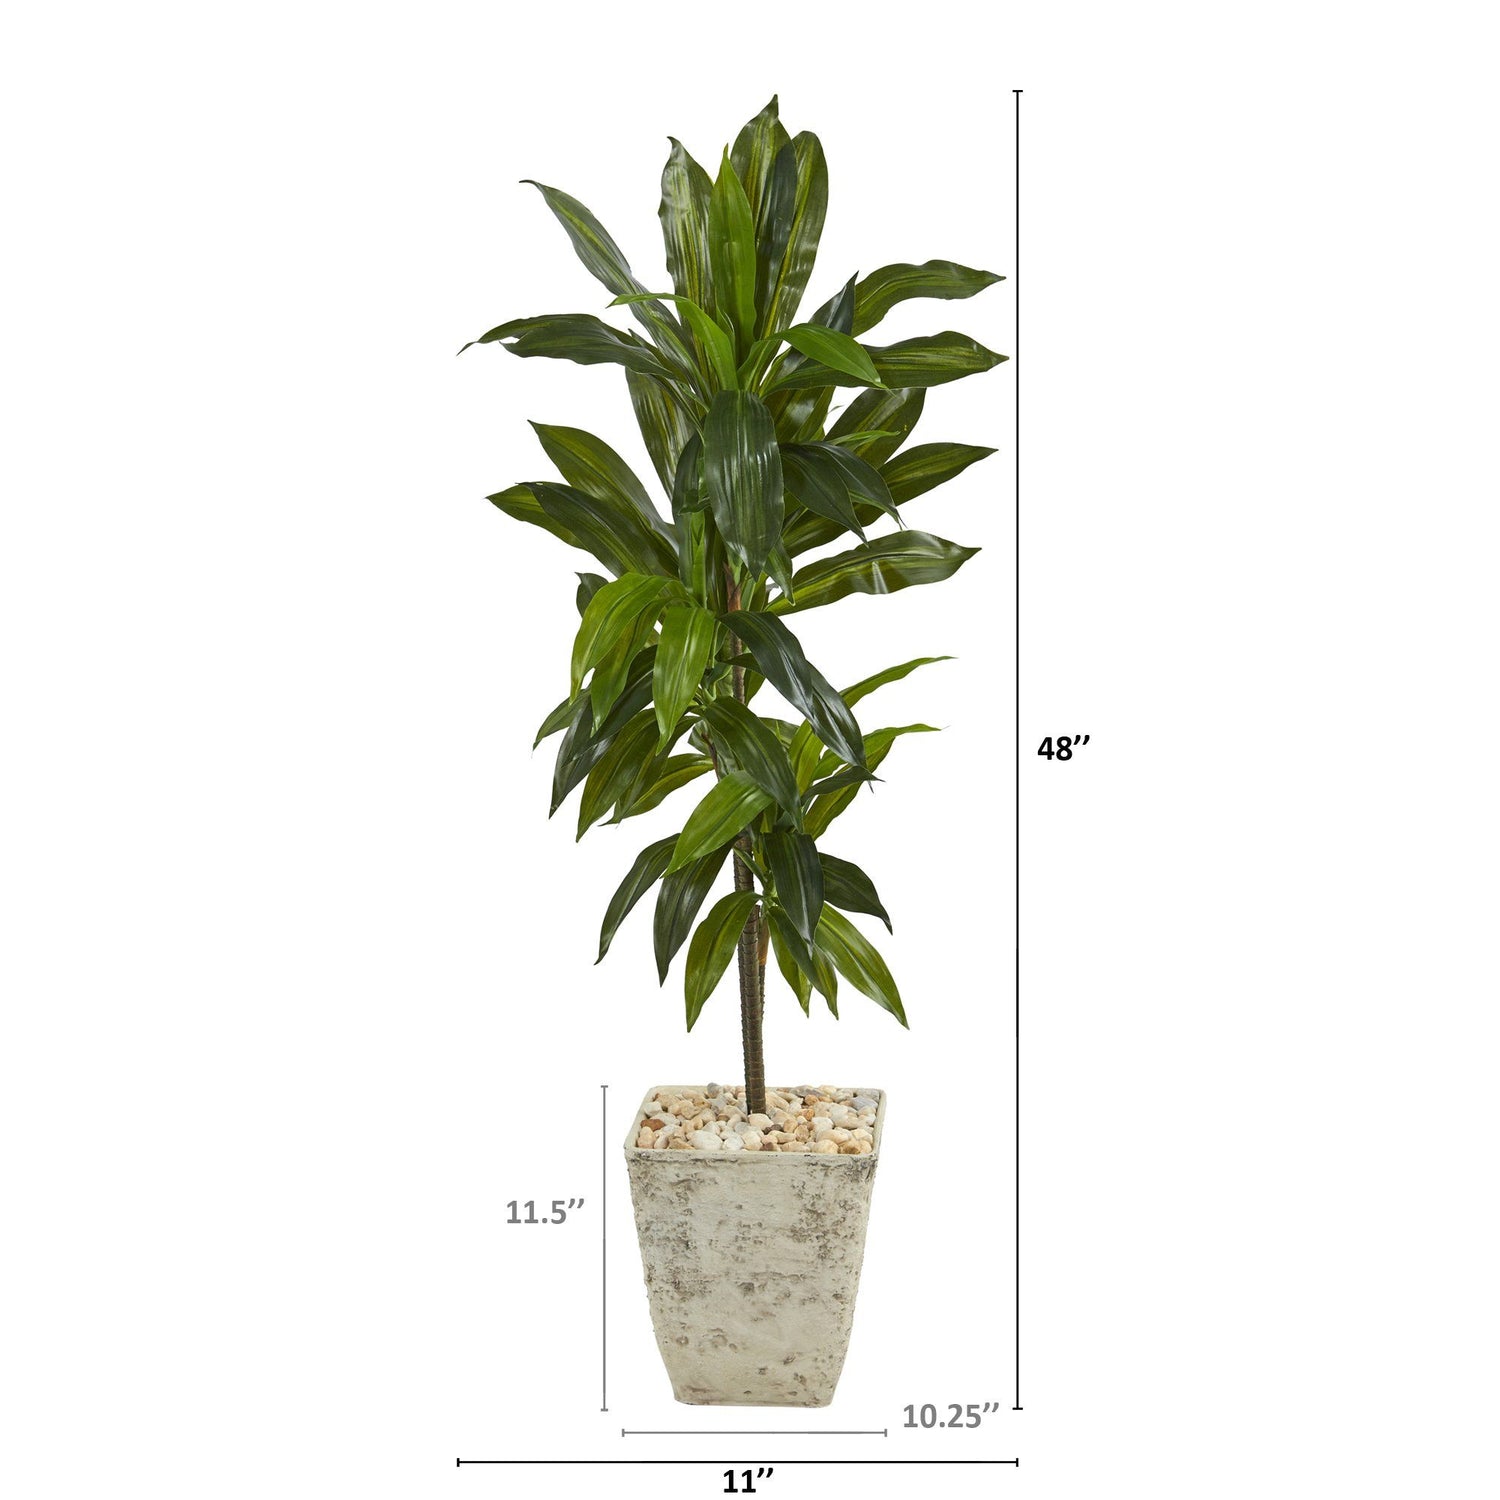 4’ Dracaena Artificial Plant in Country White Planter (Real Touch)